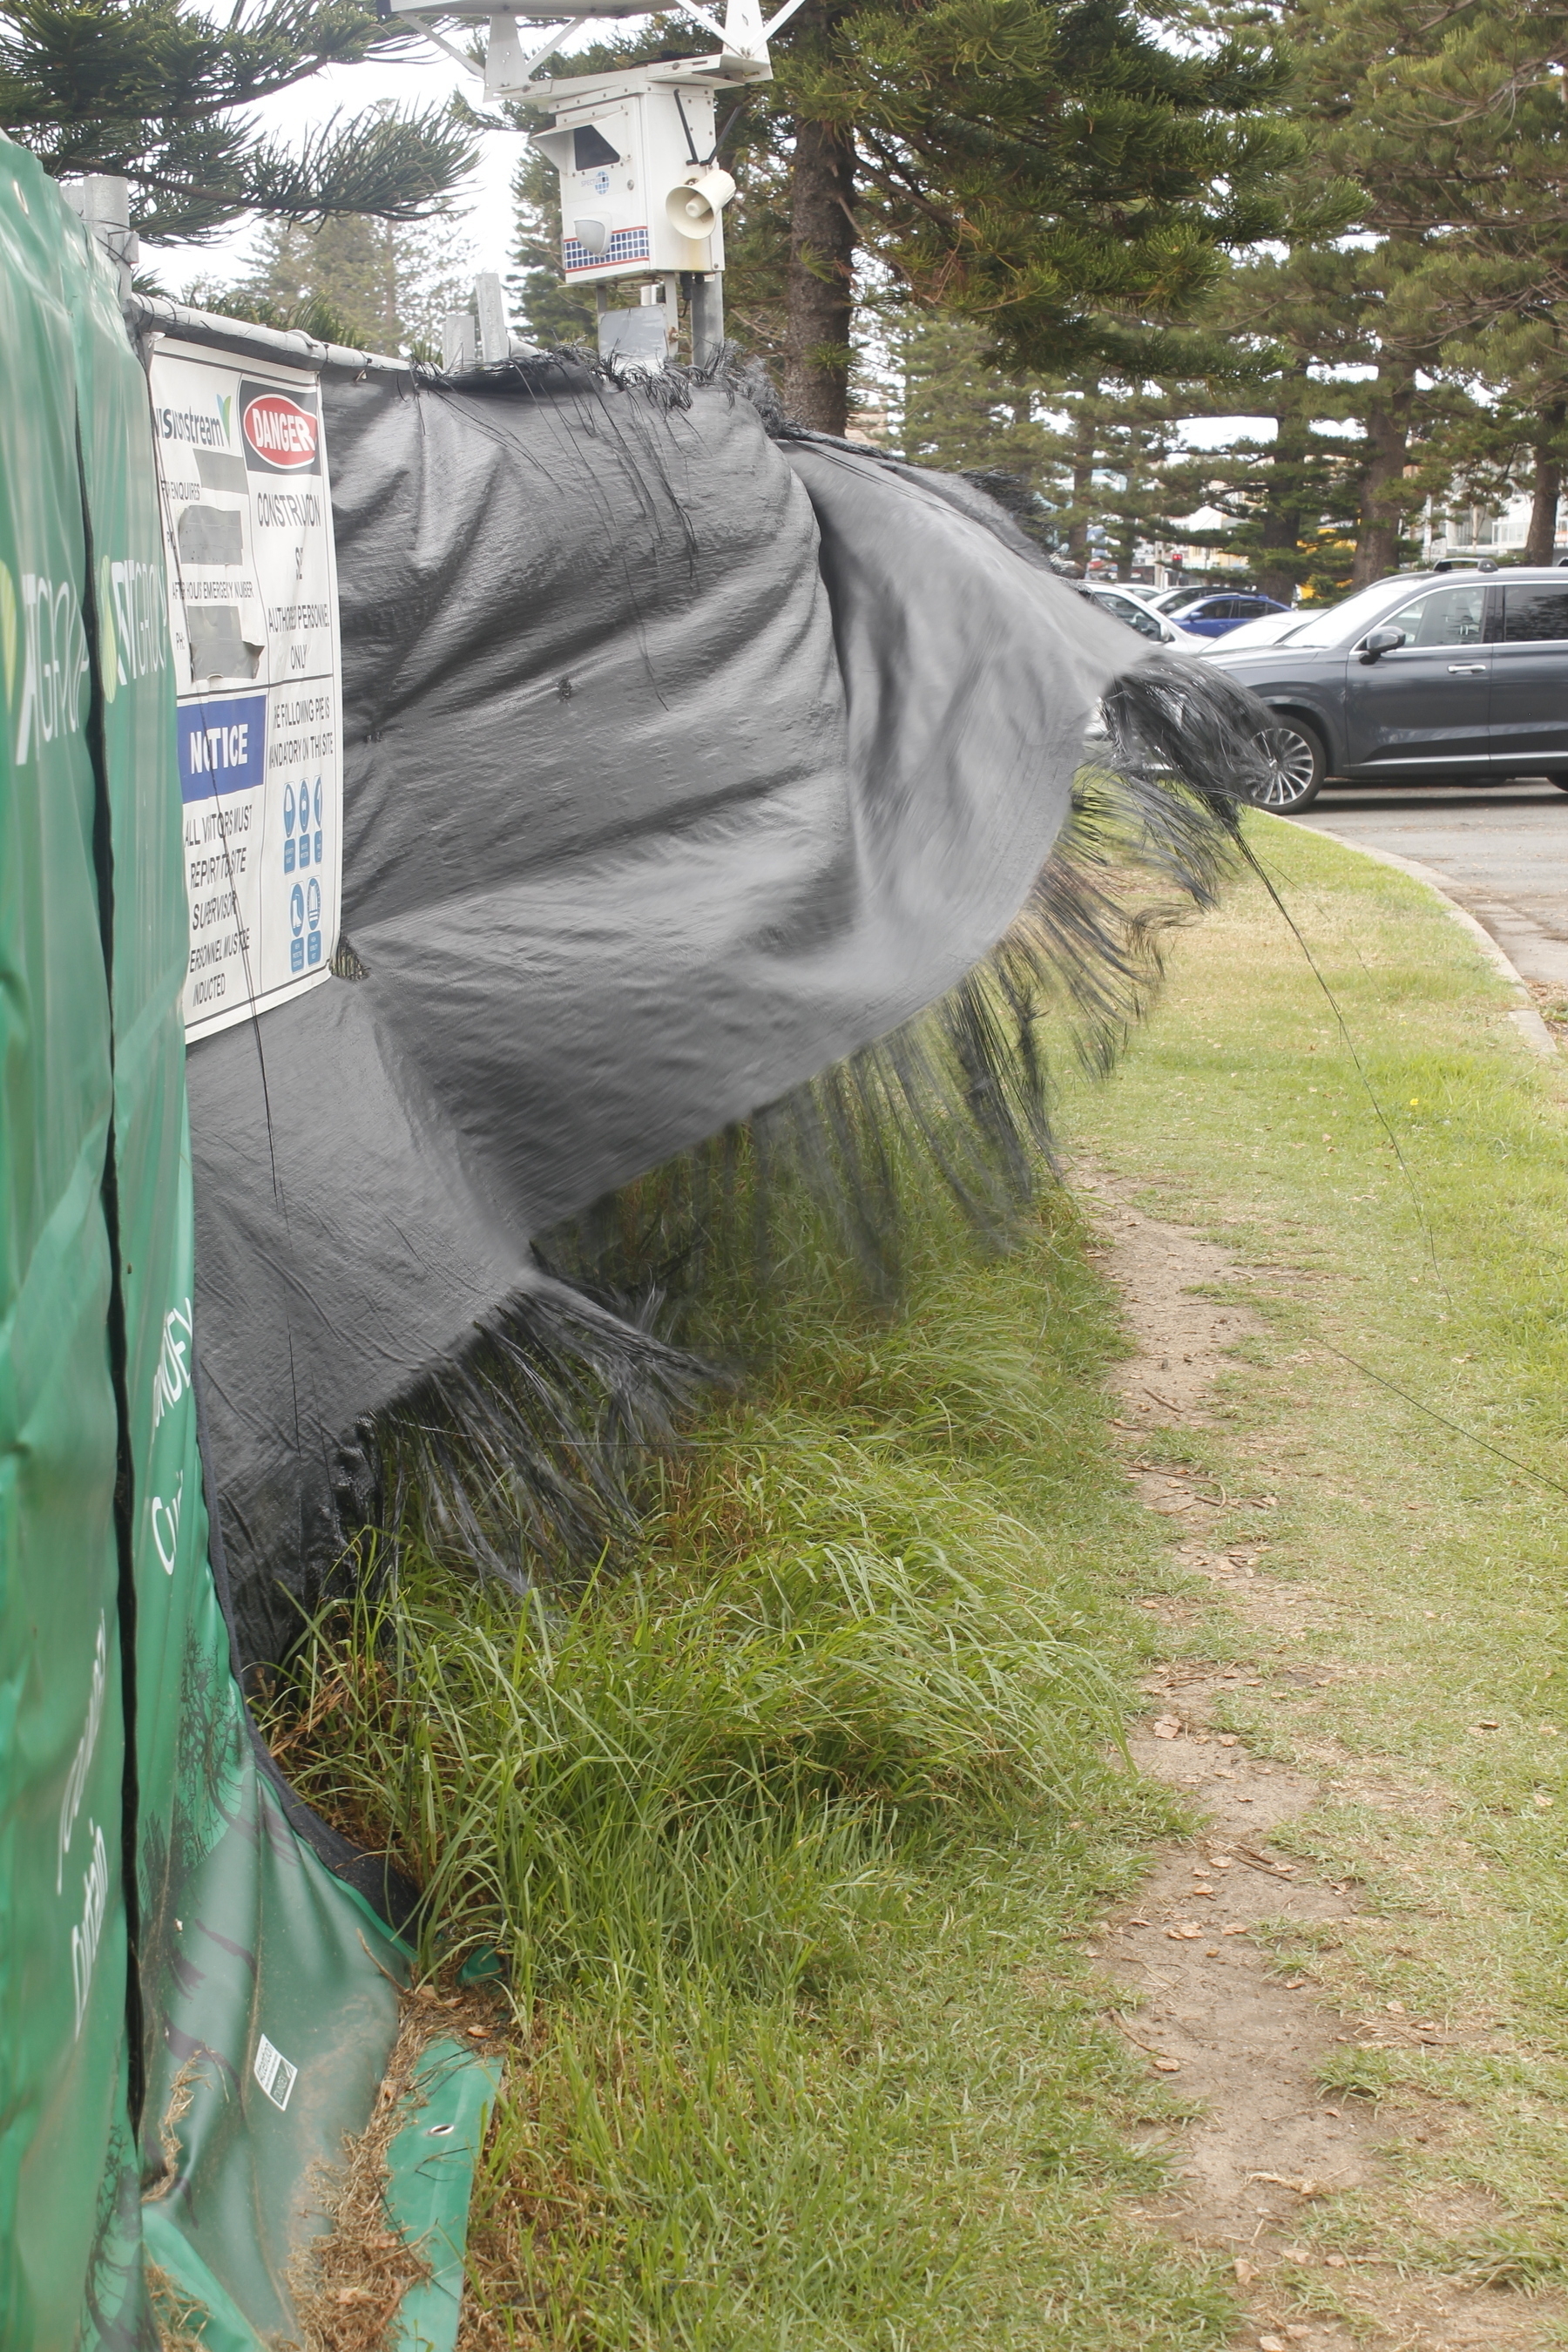 A portrait-oriented picture looking along a curving grass verge with a construction fence on the left and parked cars in the background. The fence has two separate coverings: a padded green plastic overlay in the foreground with white, illegible text, and beyond that a grey sheet made of woven plastic, like raffia. The bottom of the sheet has lost many lines of horizontal weave, leaving long thin tassles like a fringe all the way along. A strong wind lifts the sheet so that it bellies out over the grass, its tassles whipping and flying. Parts of the sheet, and sections of the tassled fringe, are blurred by their movement, while others are frozen by the camera and appear sharp.